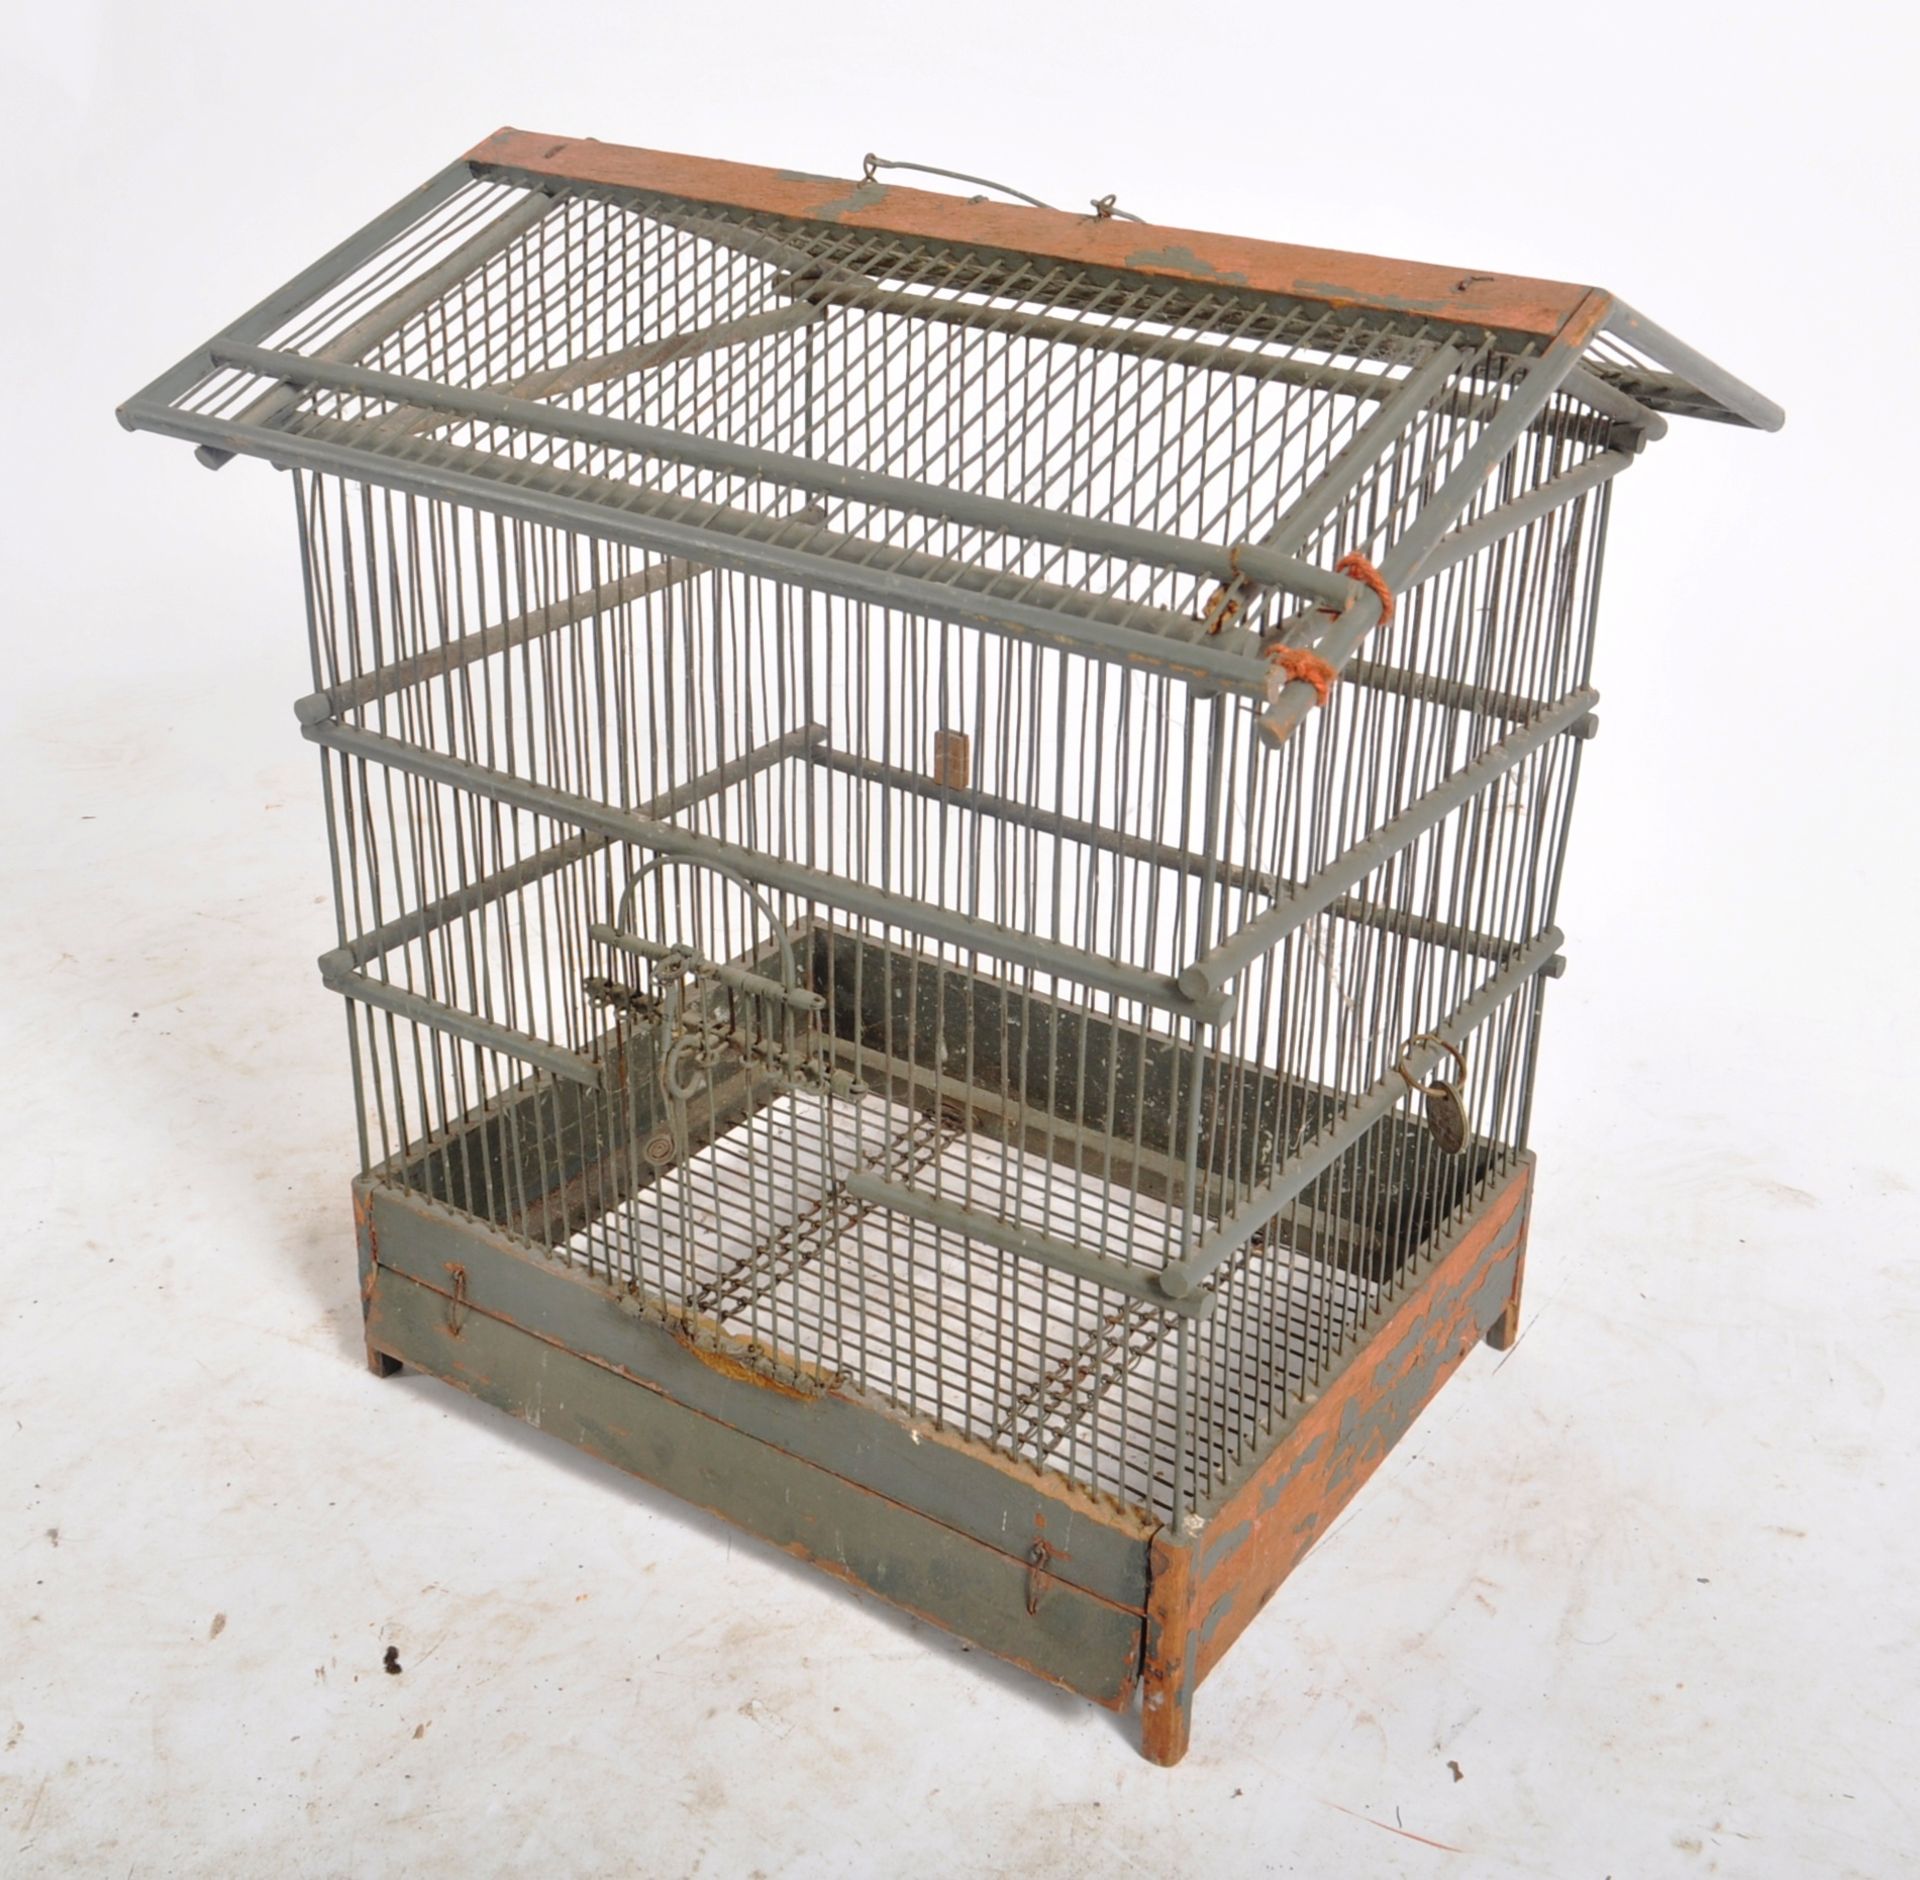 EARLY 20TH CENTURY WOOD & WIRE WORK BIRD CAGE - Image 5 of 5